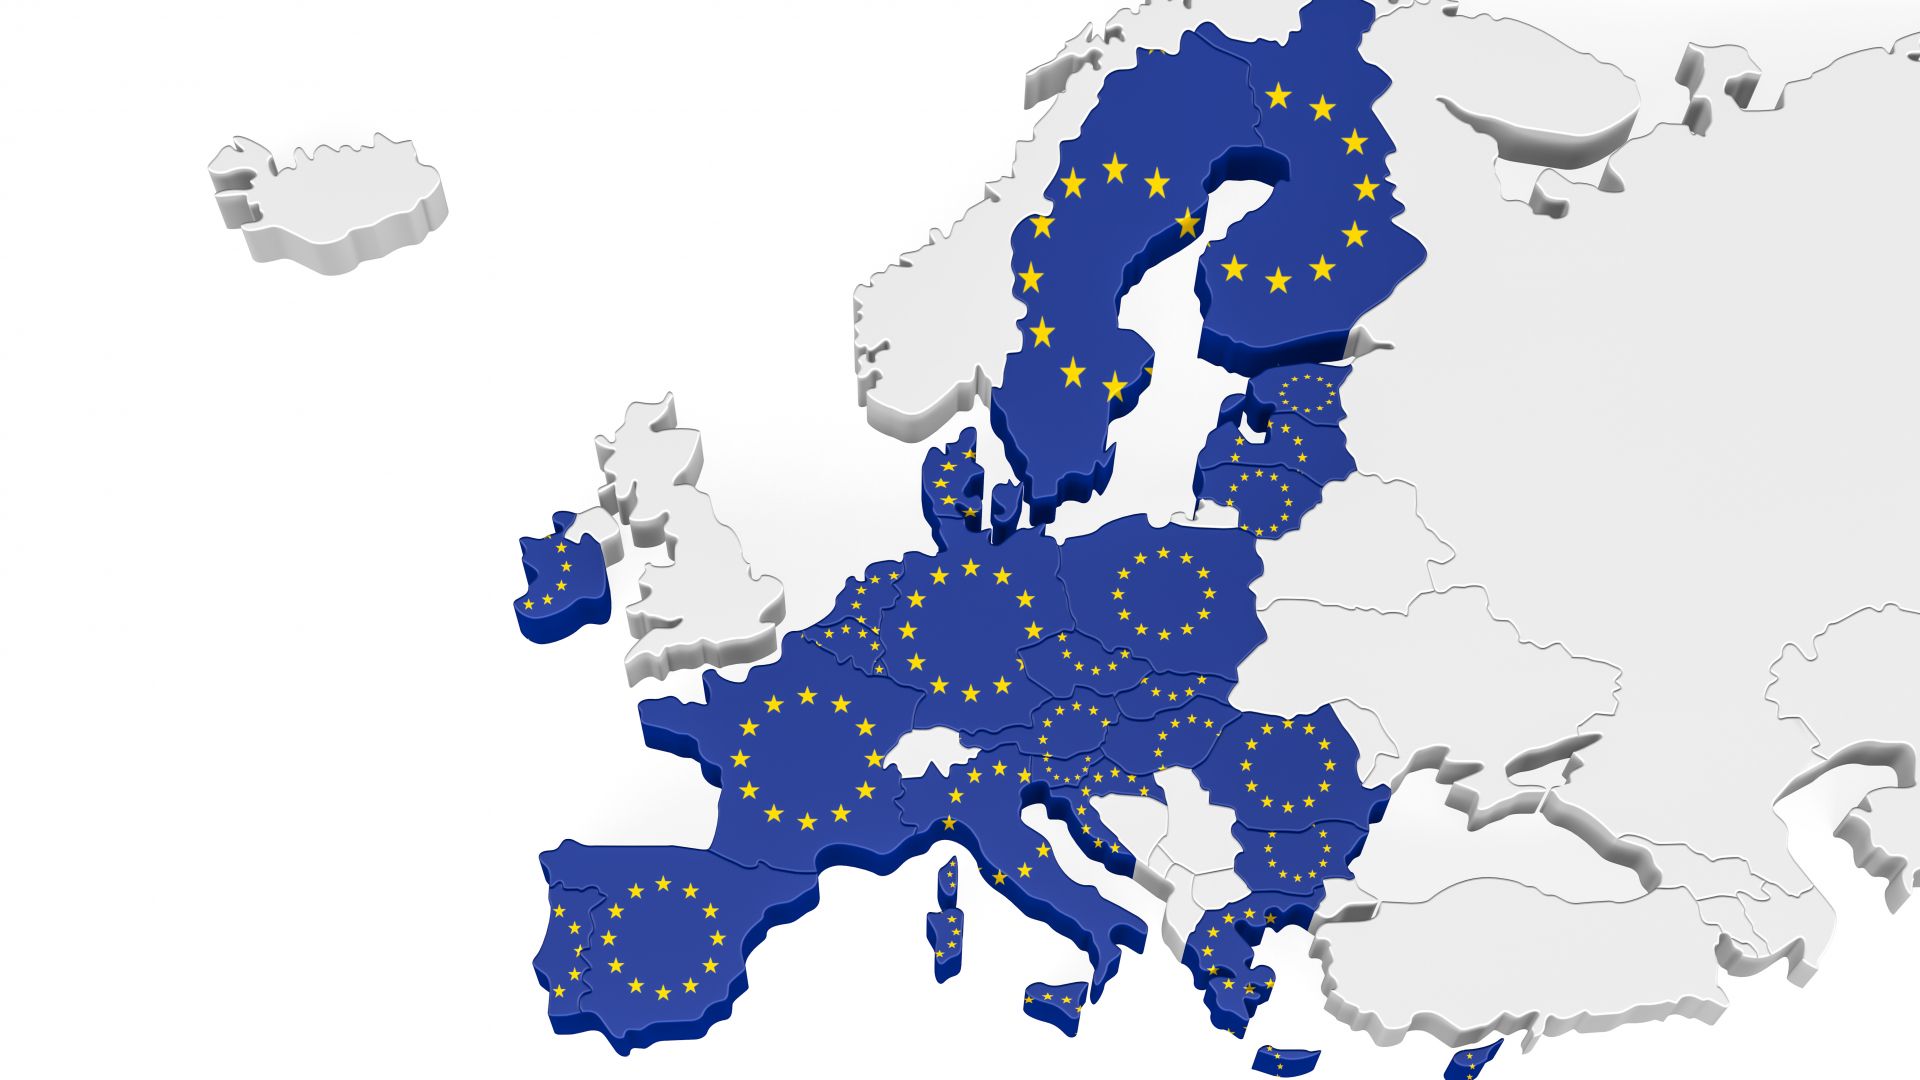 EU map with European countries marked with flags